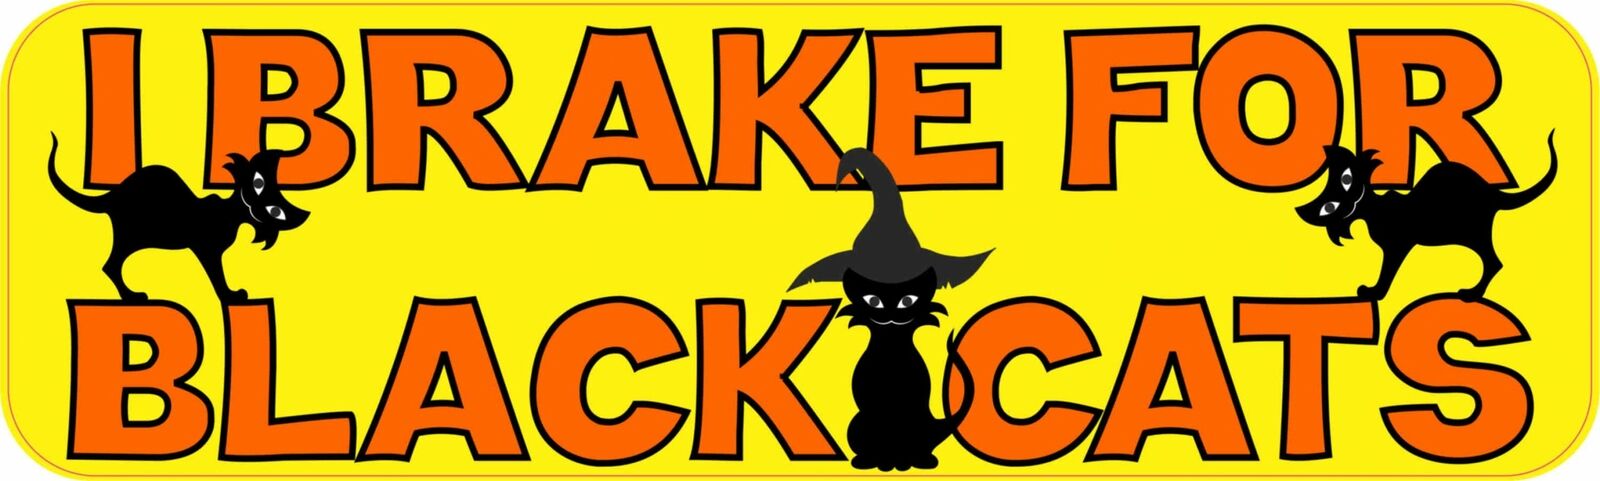 10x3 I Brake For Black Cats Bumper Magnet Magnetic Car Decal Halloween Decals